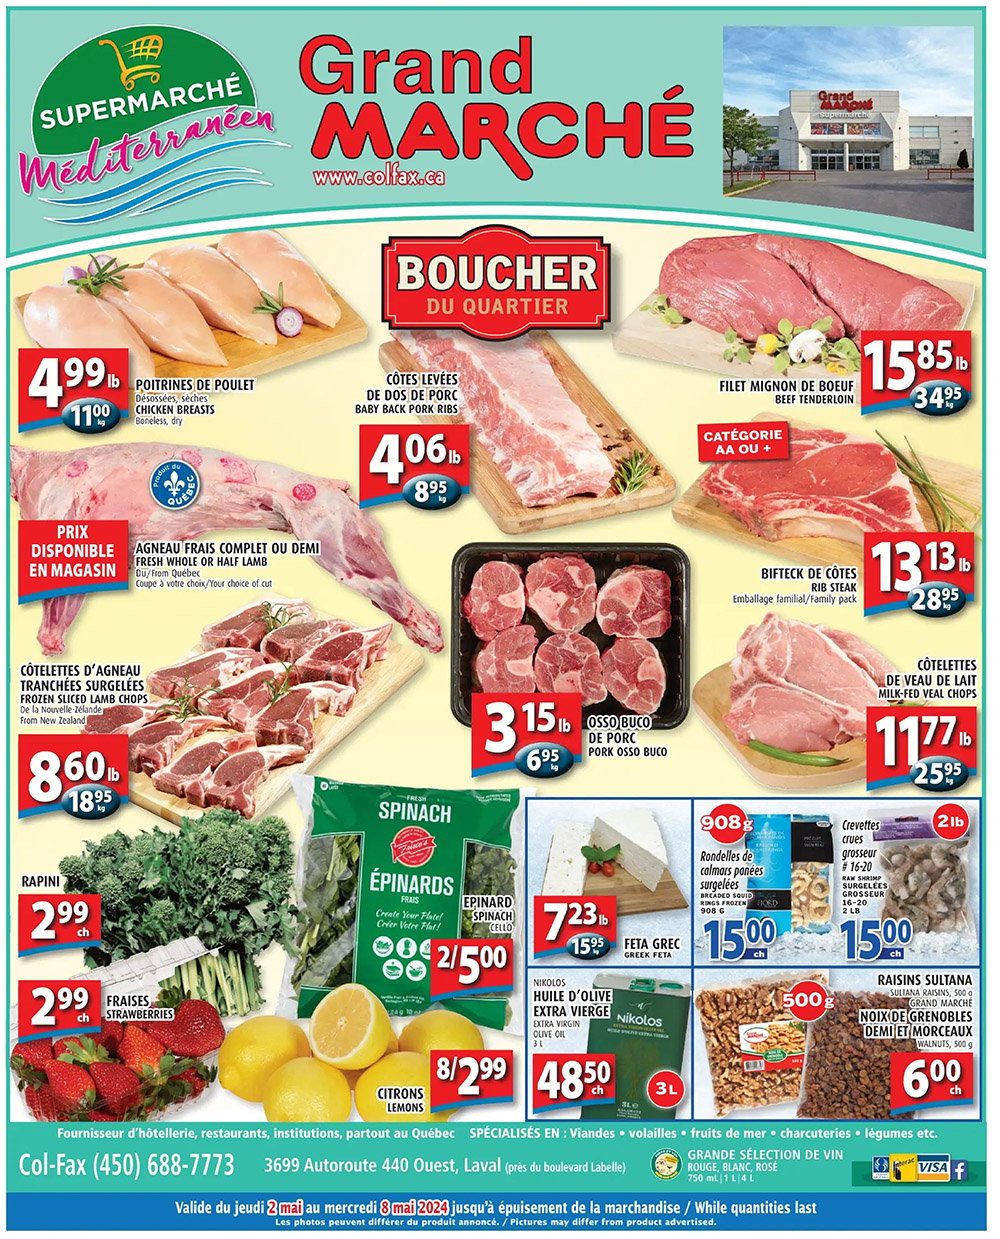 Circulaire Grand Marché Laval - Page 1